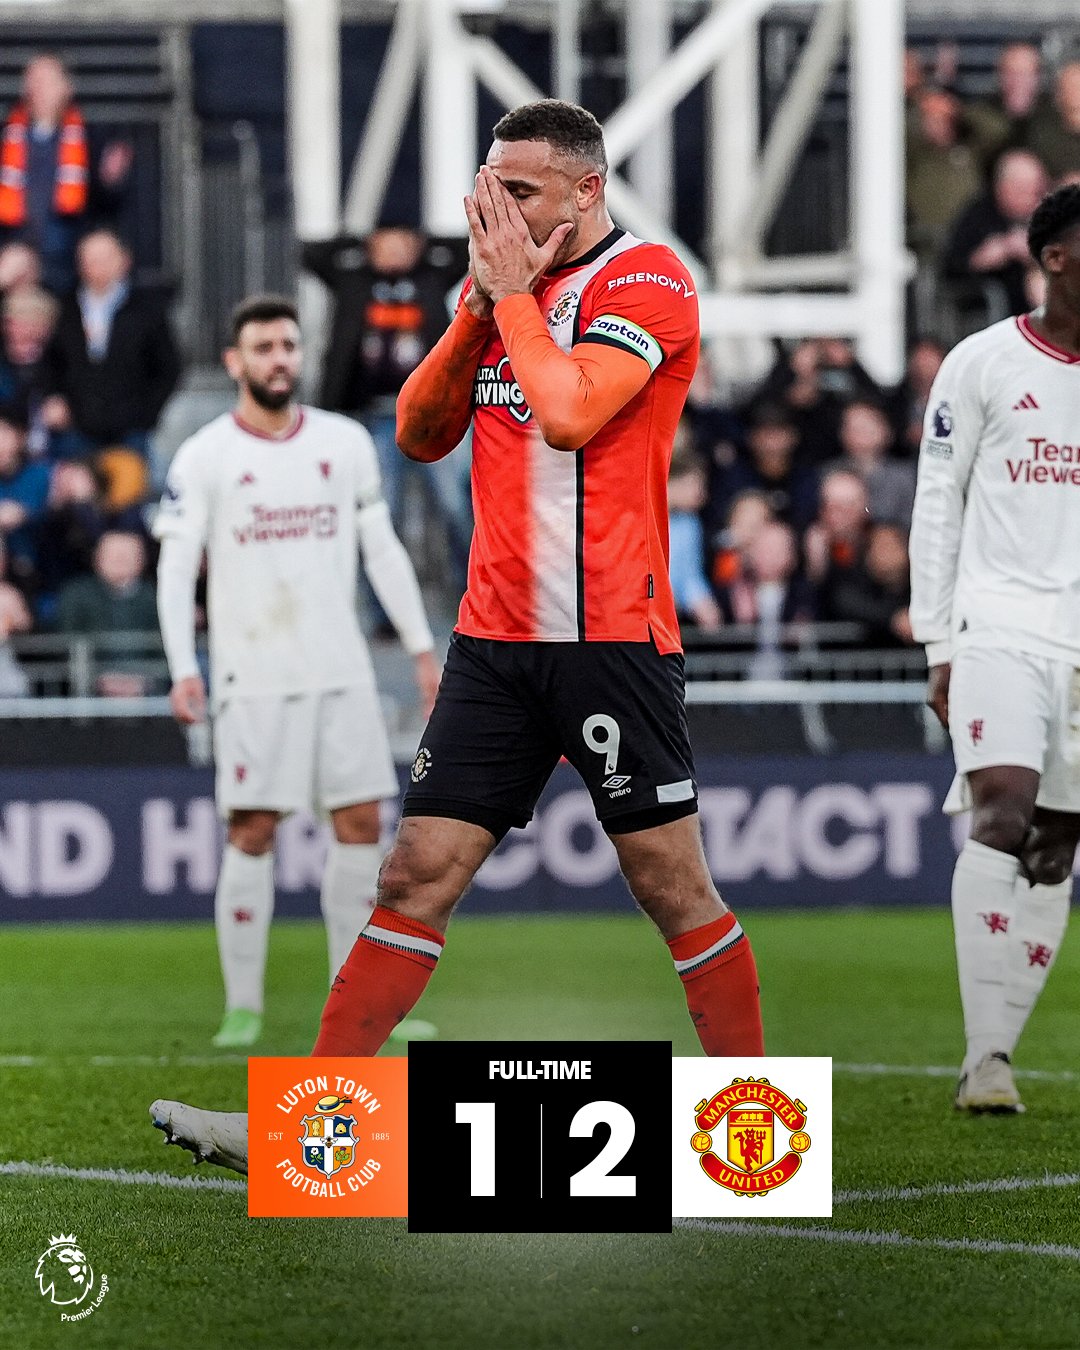 Full-time: Luton Town 1-2 Manchester United